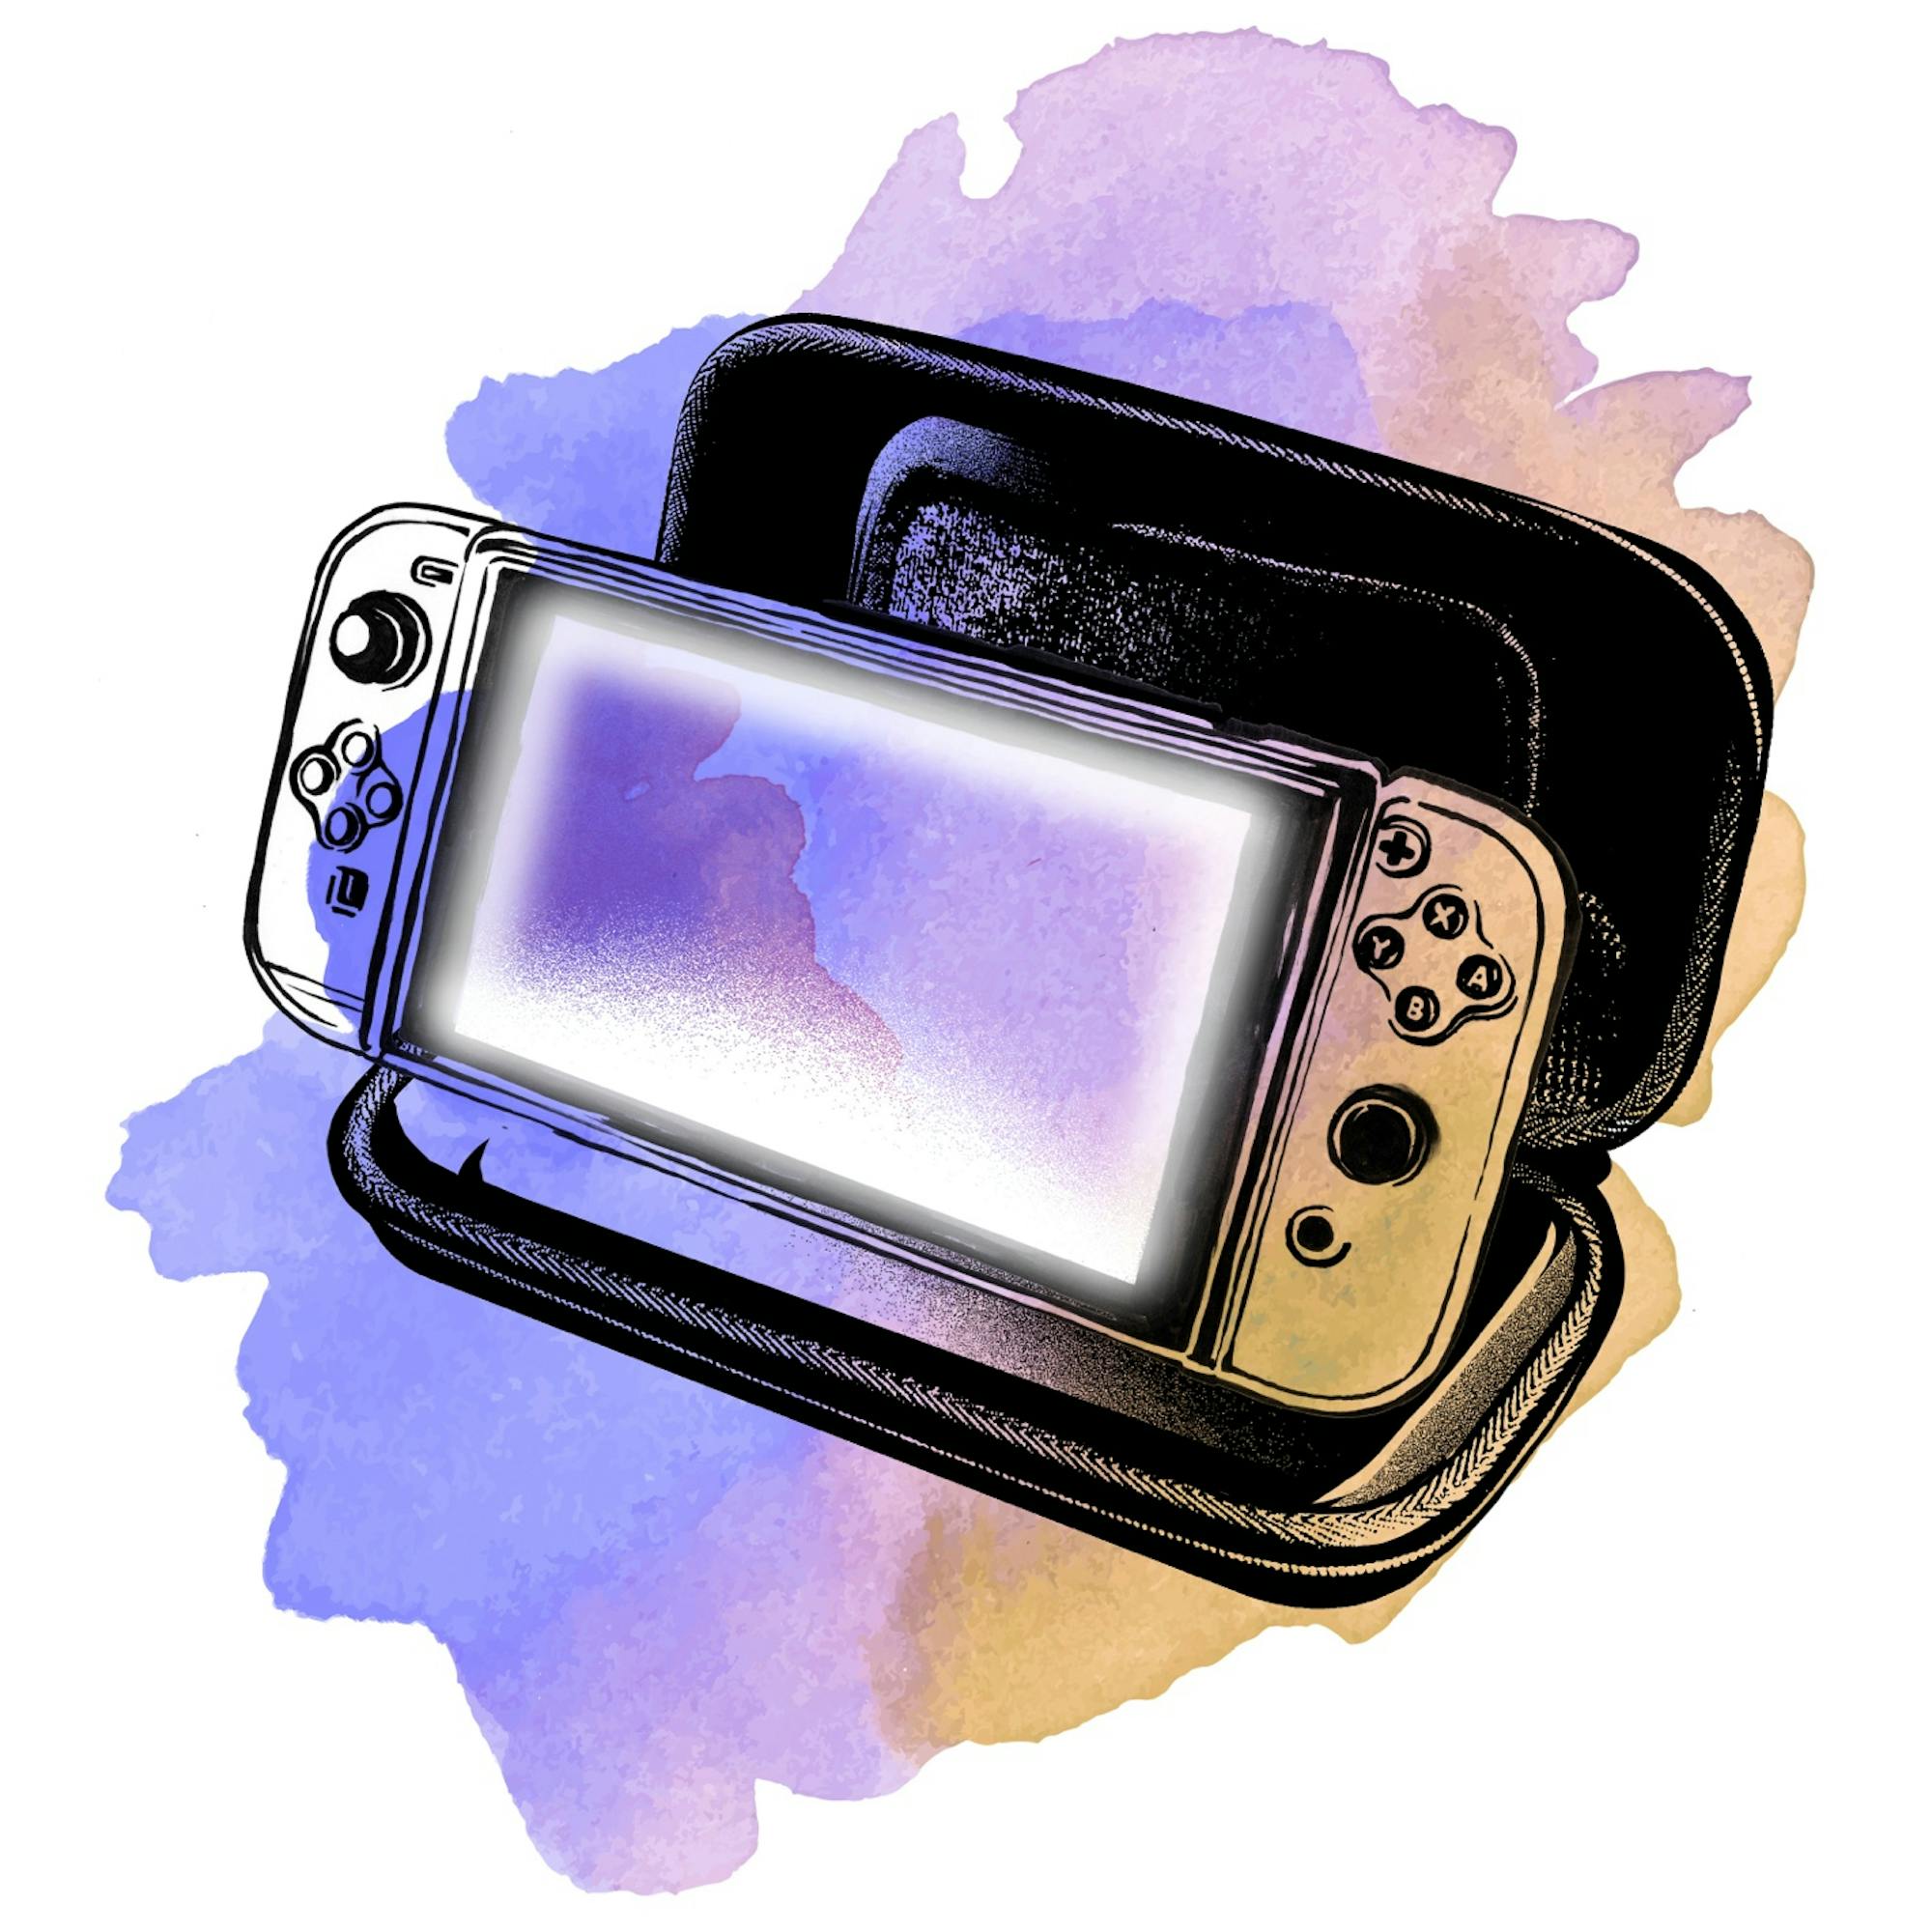 Watercolor illustration of Maitreyi’s Nintendo Switch. Kids these days!